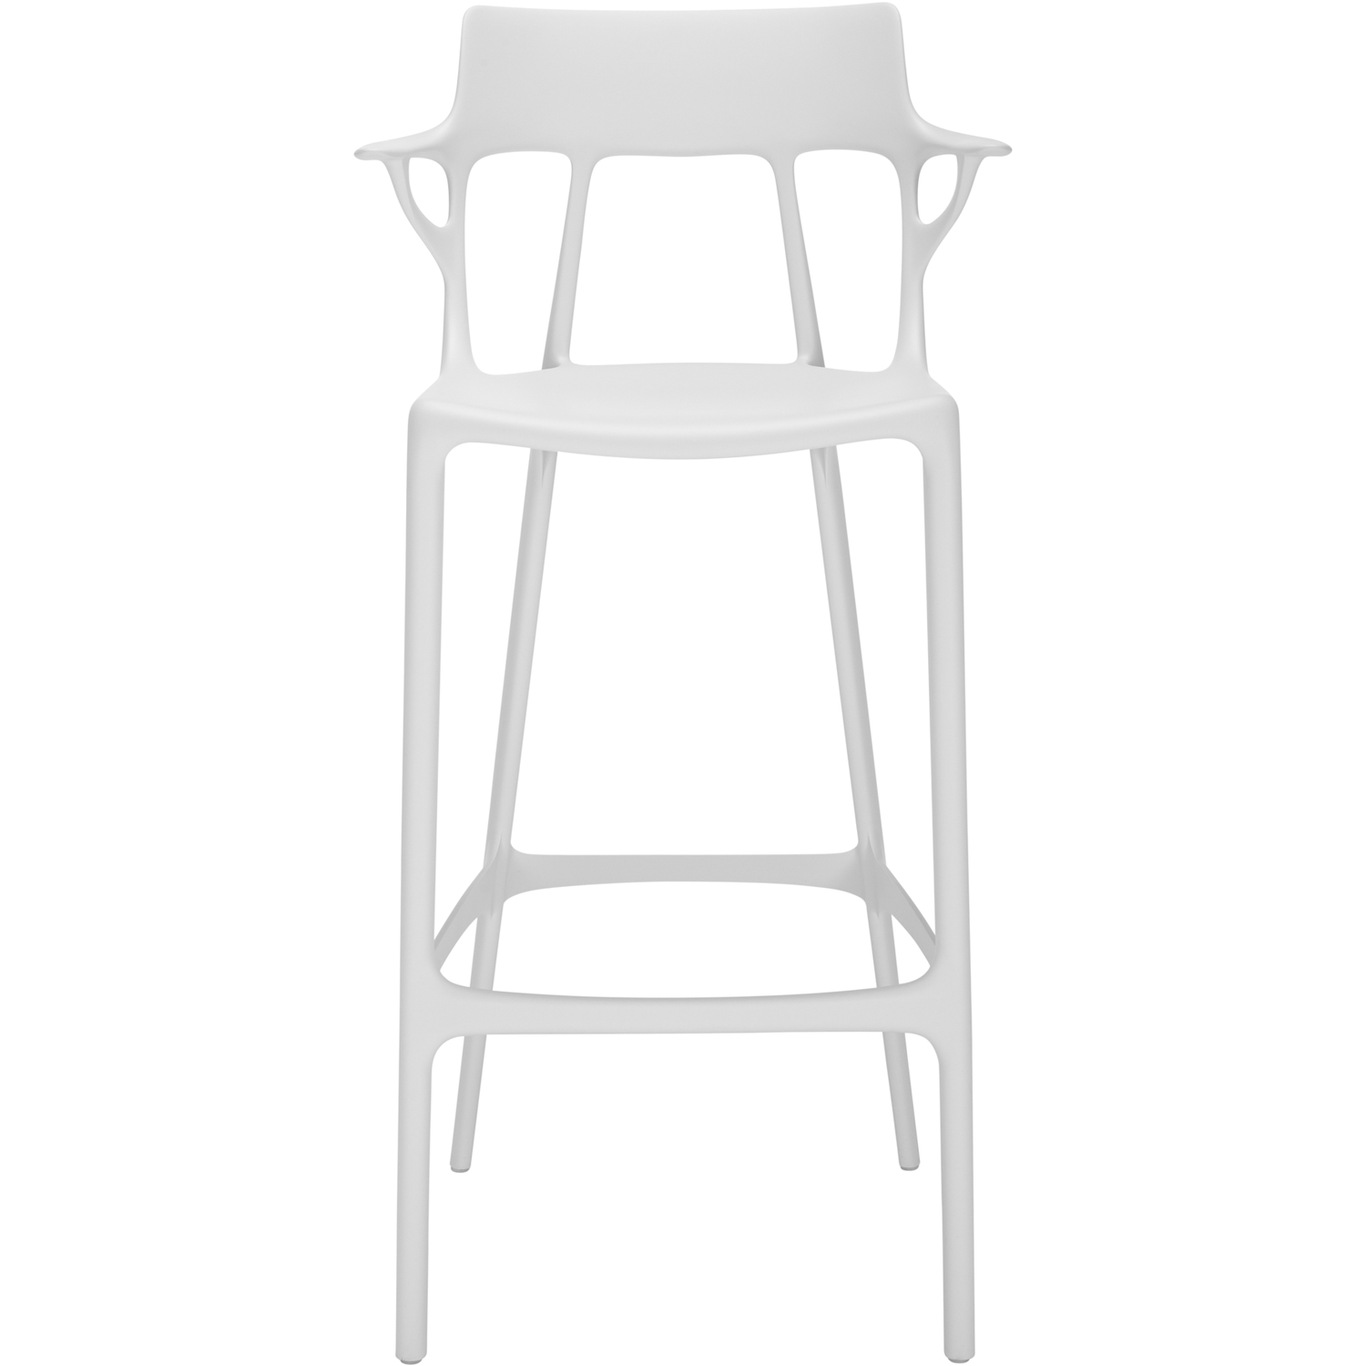 A I Bar Stool Recycled 75 Cm White, Recycled Plastic Counter Stool